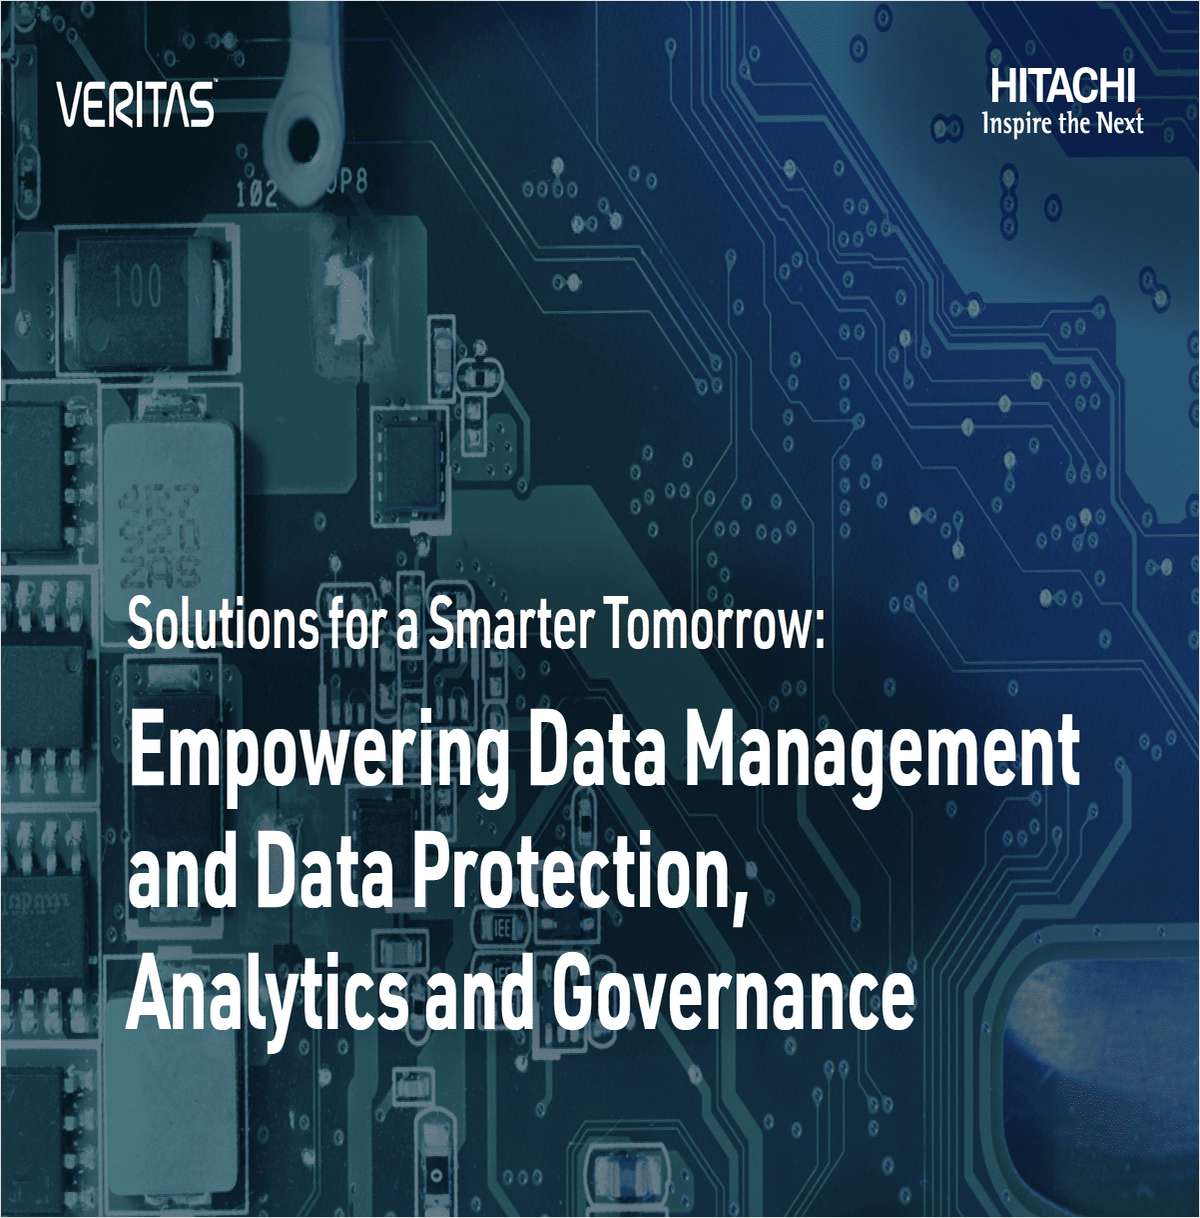 Empowering Data Management and Data Protection, Analytics and Governance